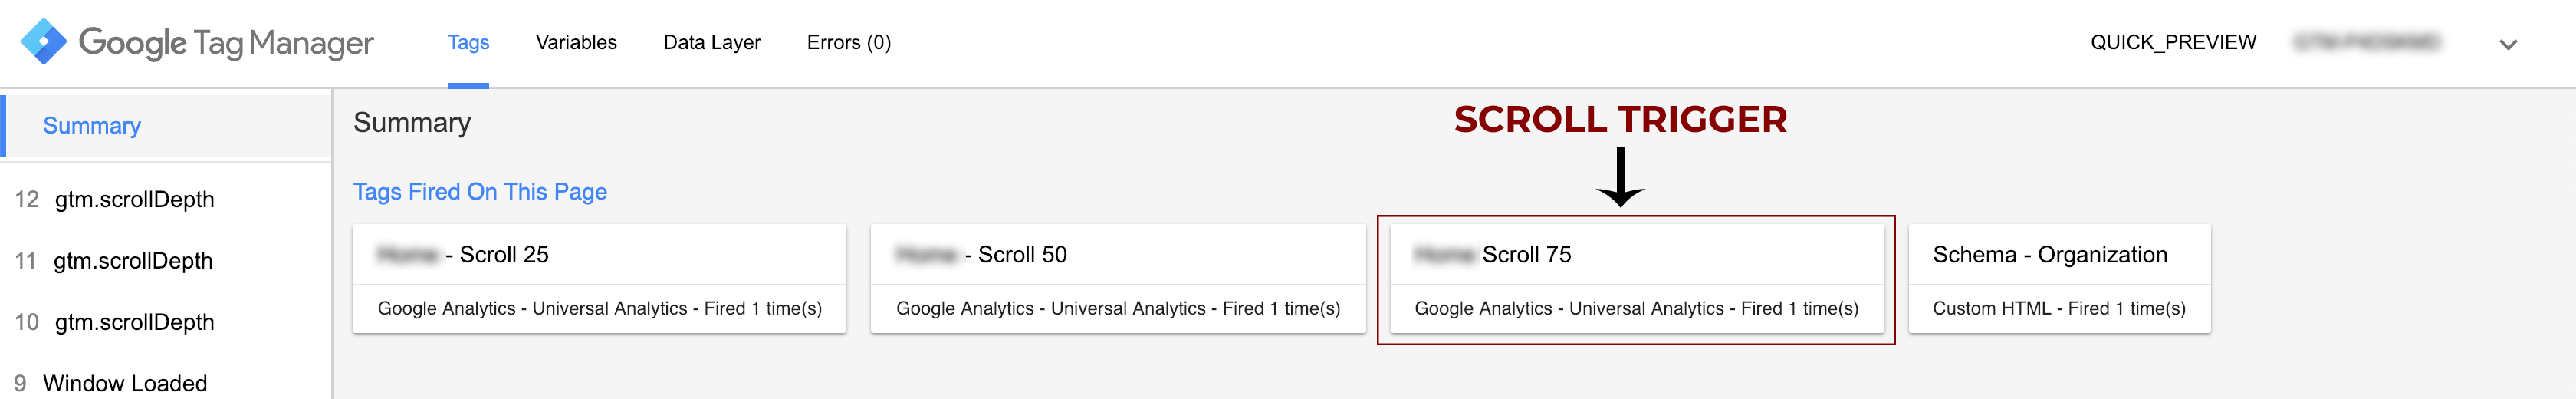 Google Tag Manager scroll trigger example